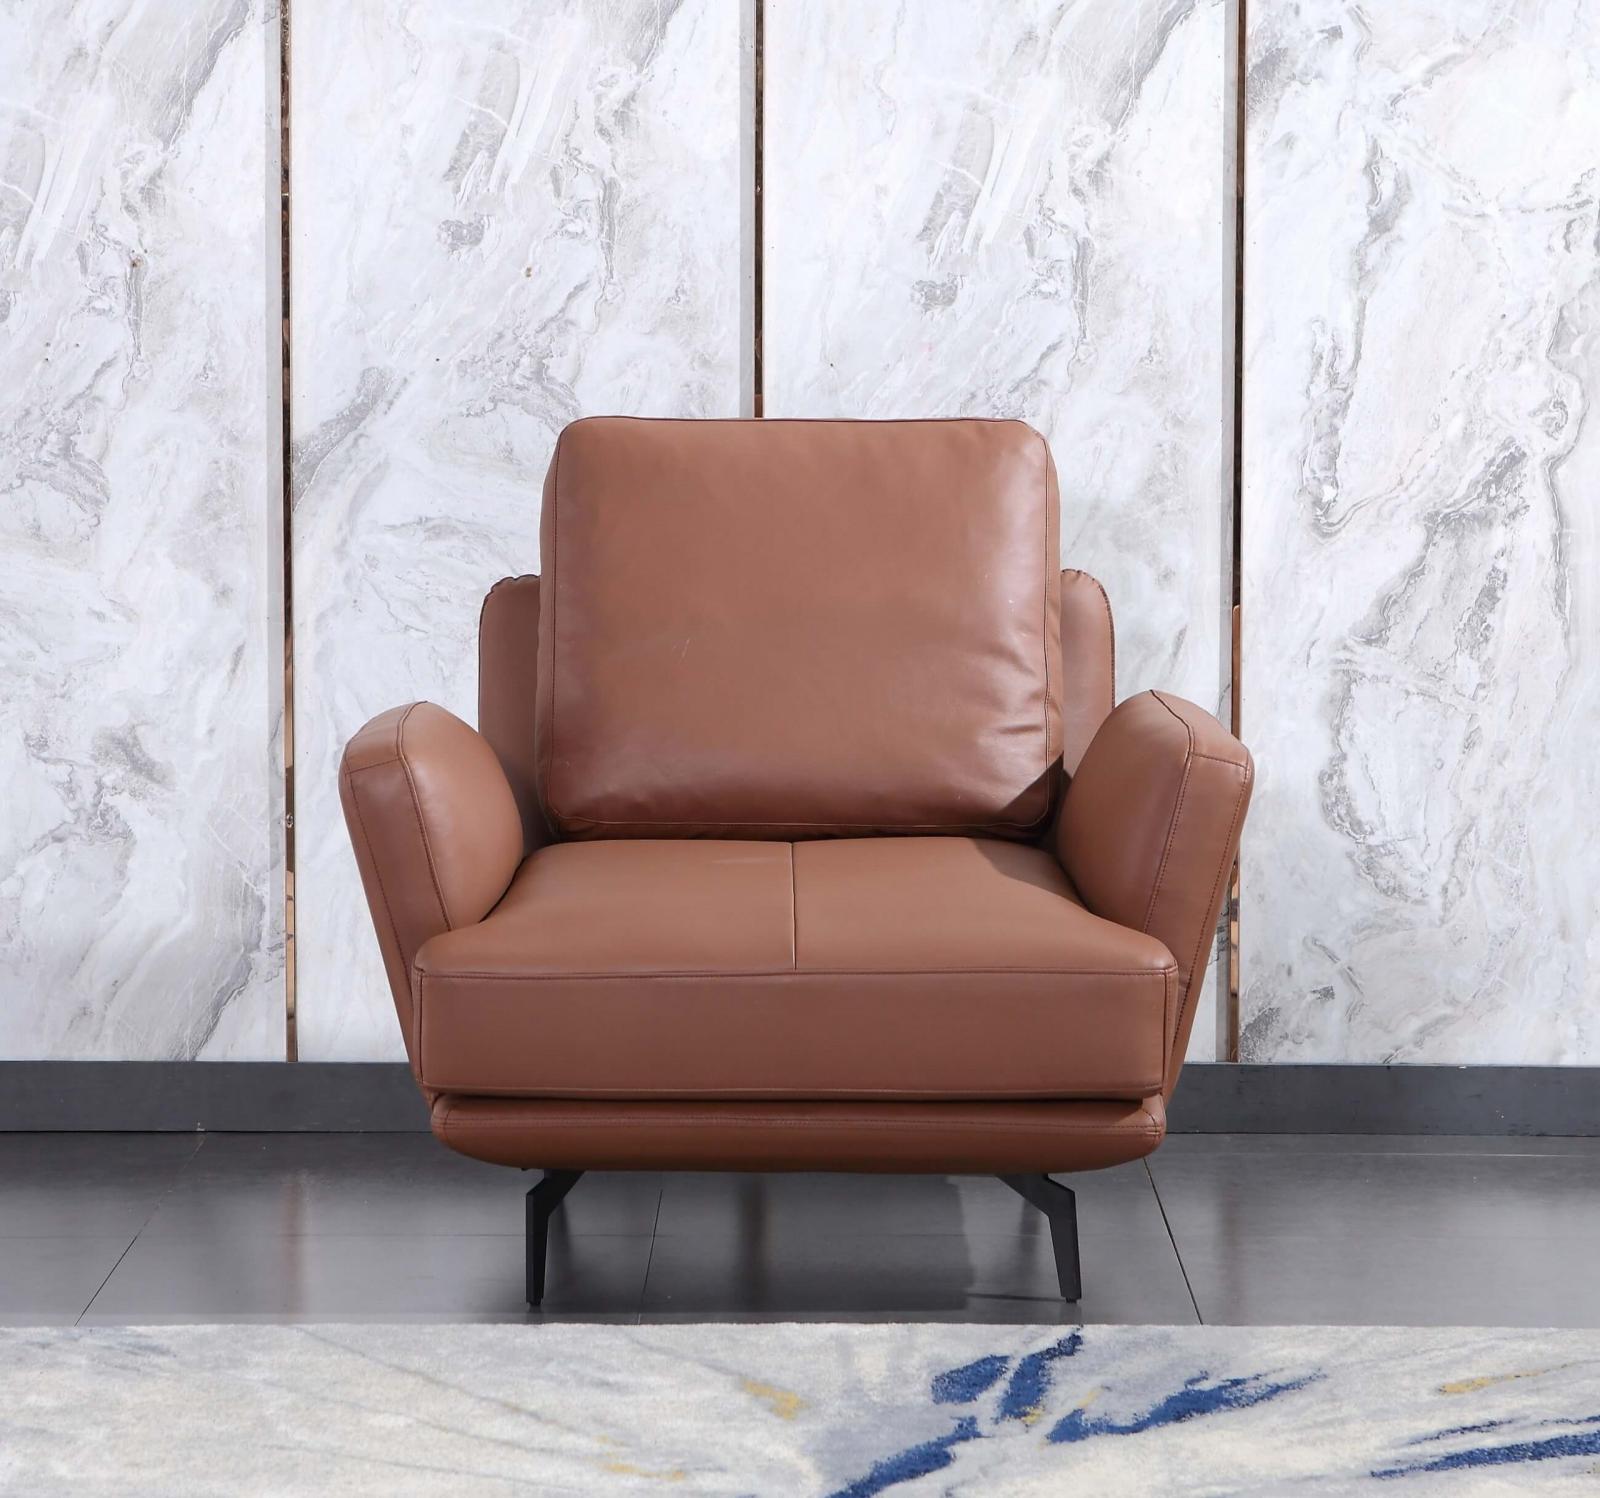 Premium Italian Leather Russet Brown TRATTO Arm Chair EUROPEAN FURNITURE Modern - image 1 of 3